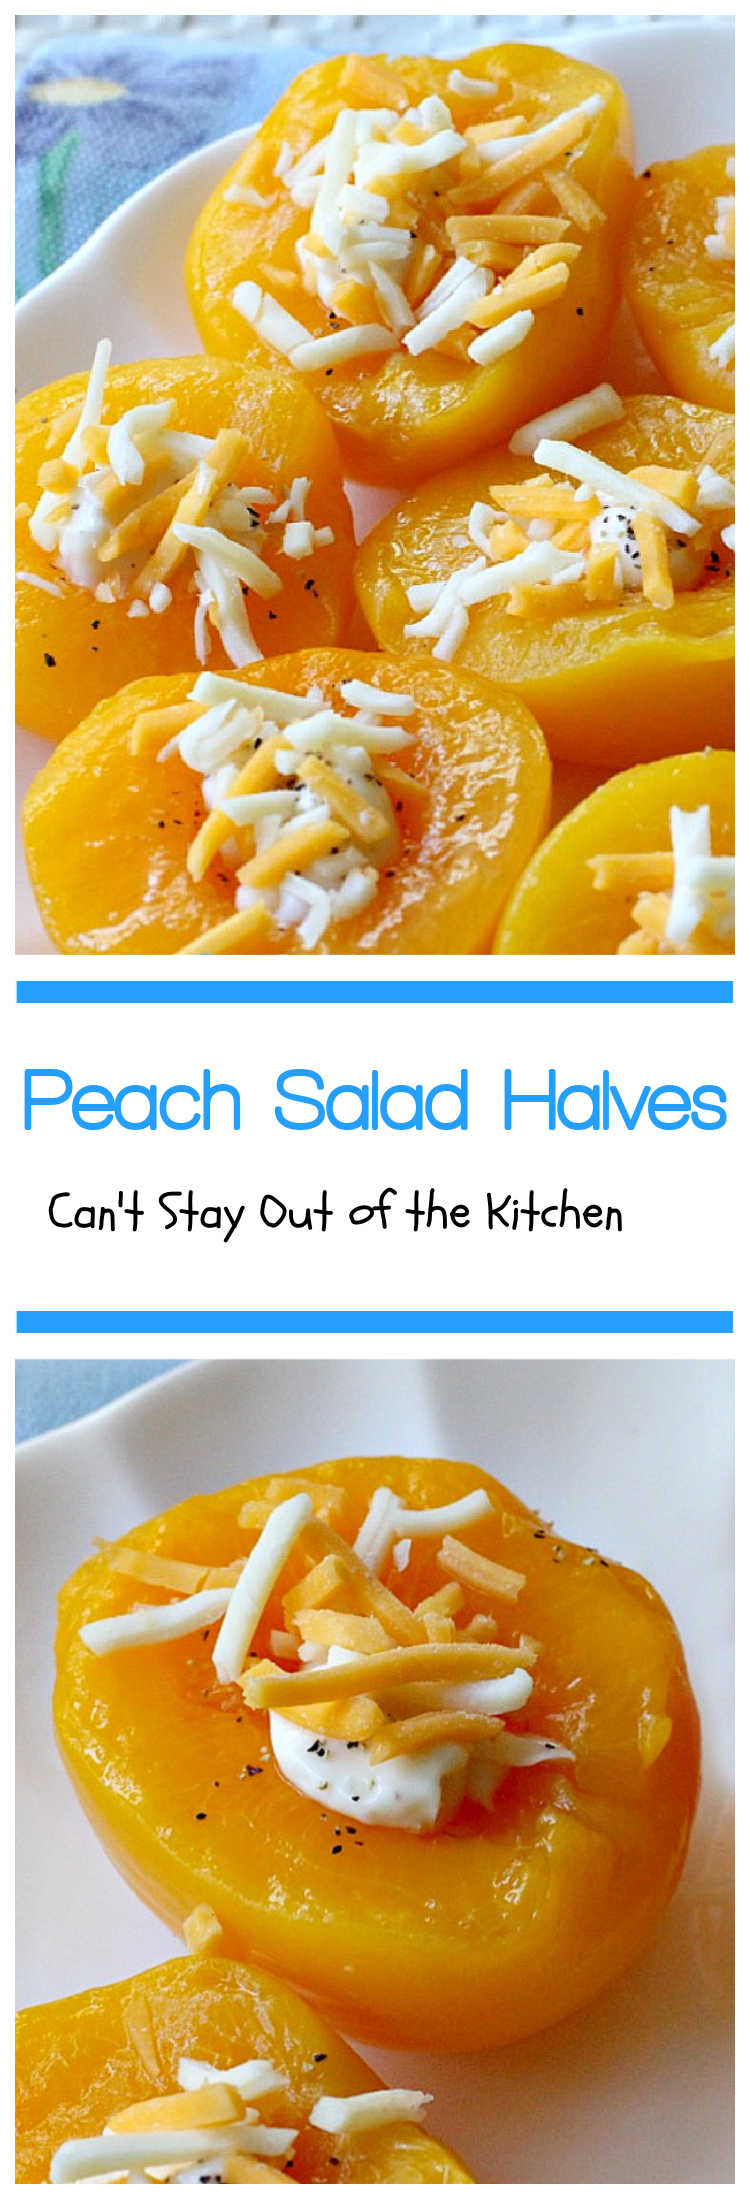 Peach Salad Halves | Can't Stay Out of the Kitchen | Everyone raves over this easy & simple #salad every time I make it. This lovely #FruitSalad has only 4 ingredients making it wonderful for #holiday menus, too. #peaches #cheese #GlutenFree #PeachSaladHalves